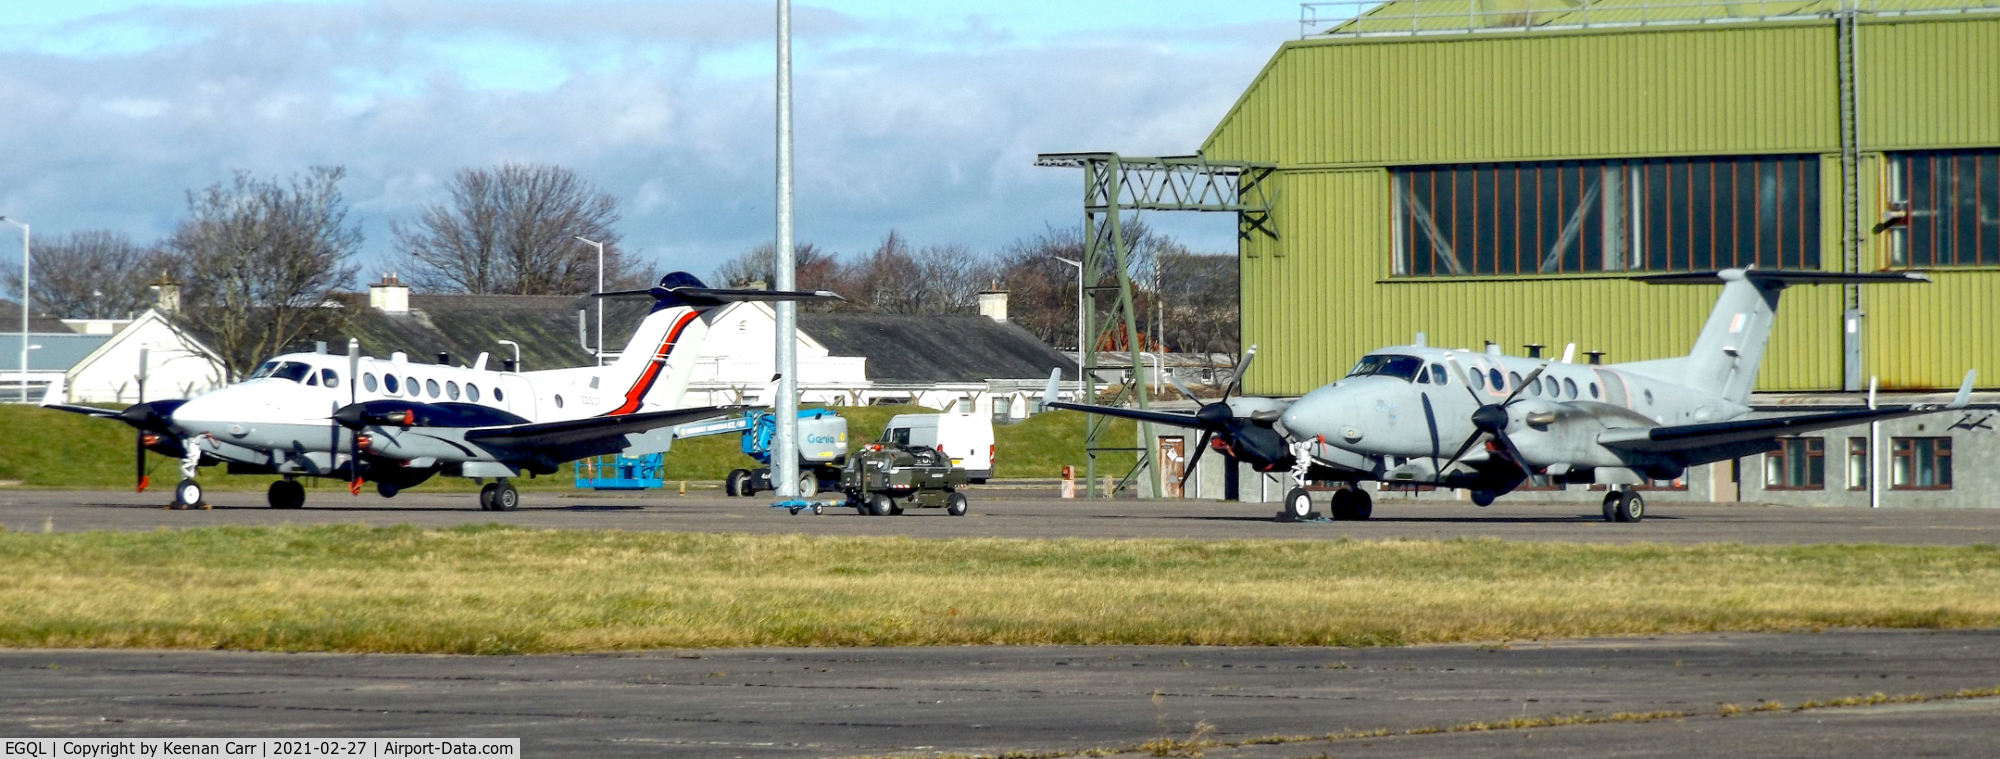 RAF Leuchars Airport, Leuchars, Scotland United Kingdom (EGQL) - 2x No. 14 Squadron Shadows, one of which is an R1 (ZZ504) and the other which is an R1+ (ZZ507)